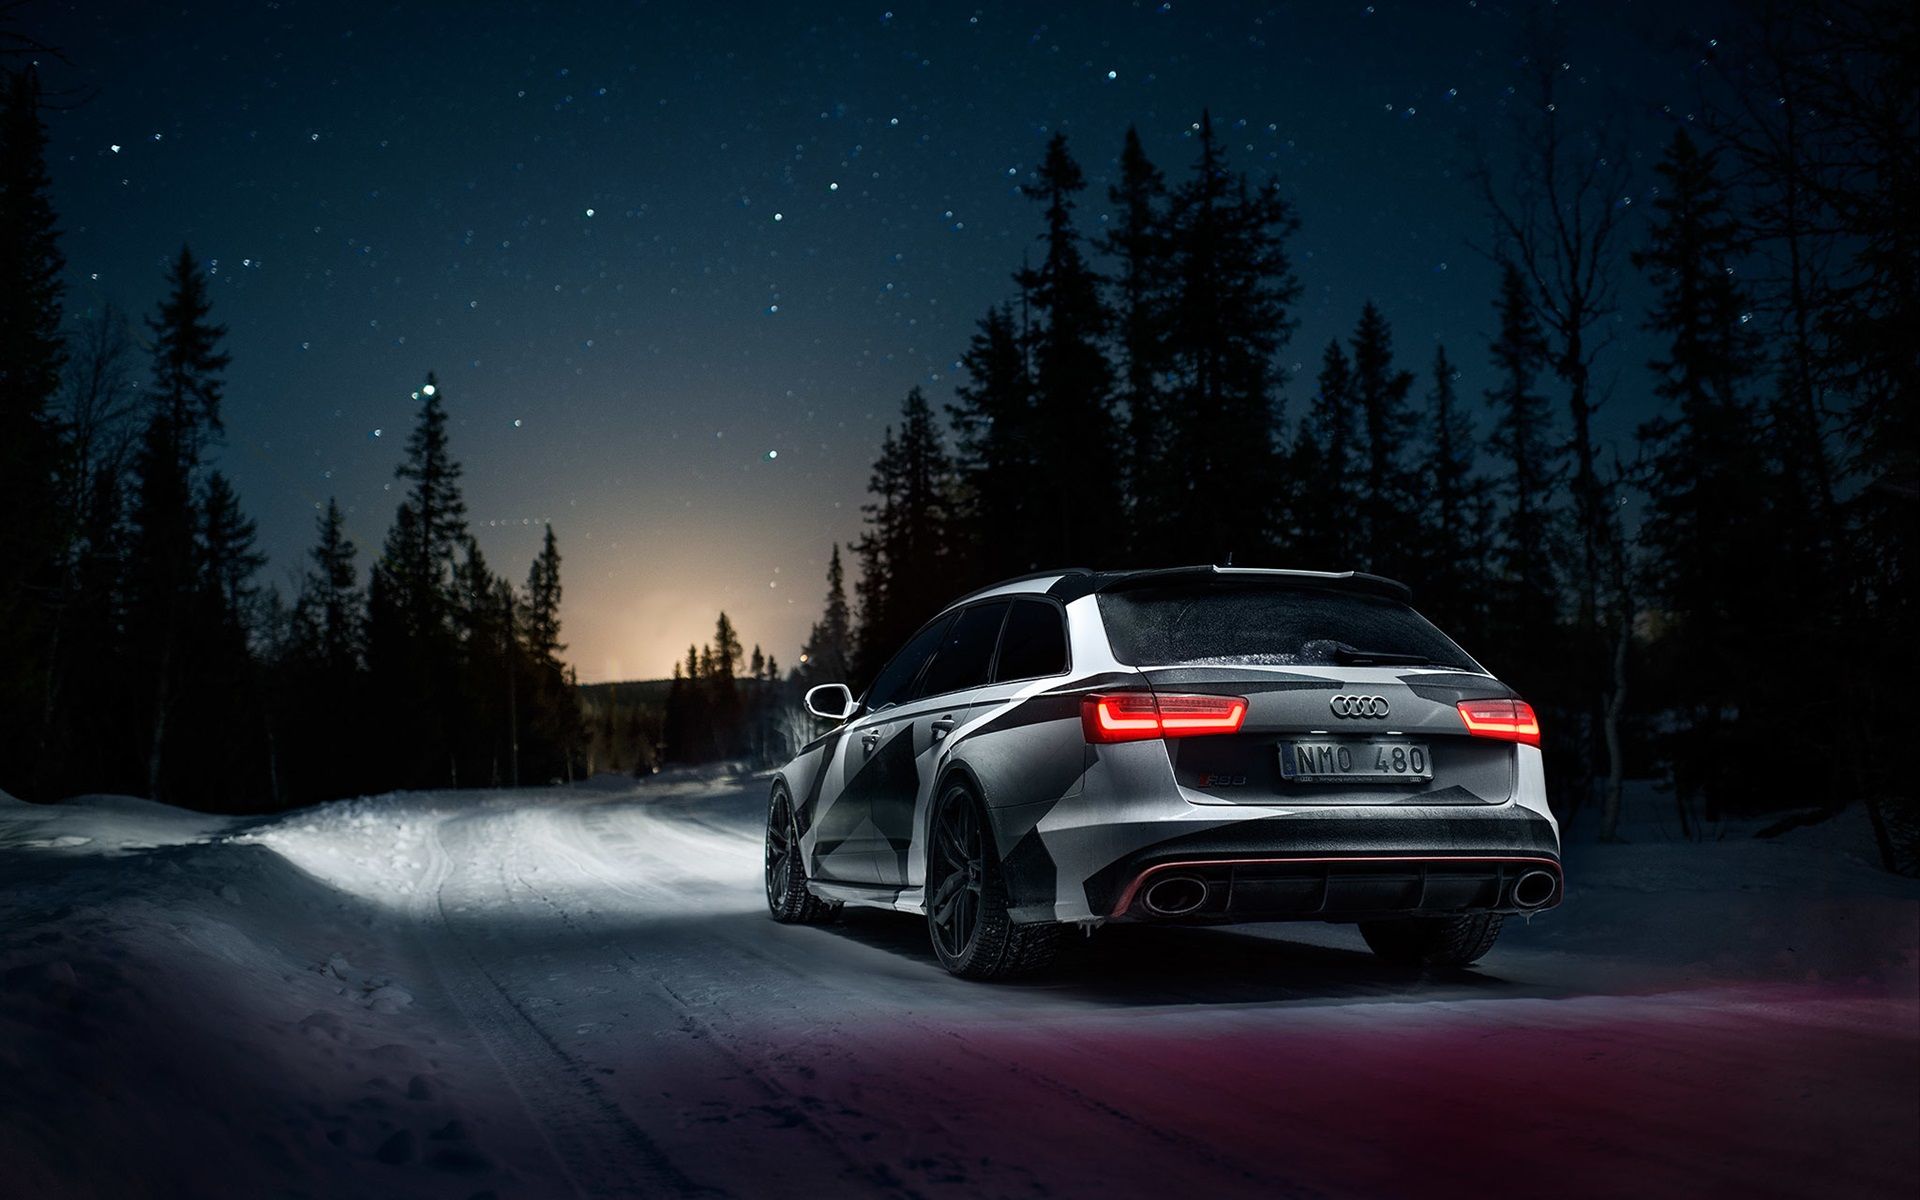 Wallpaper Audi RS6 car rear view, winter, snow, night 1920x1200 HD Picture, Image